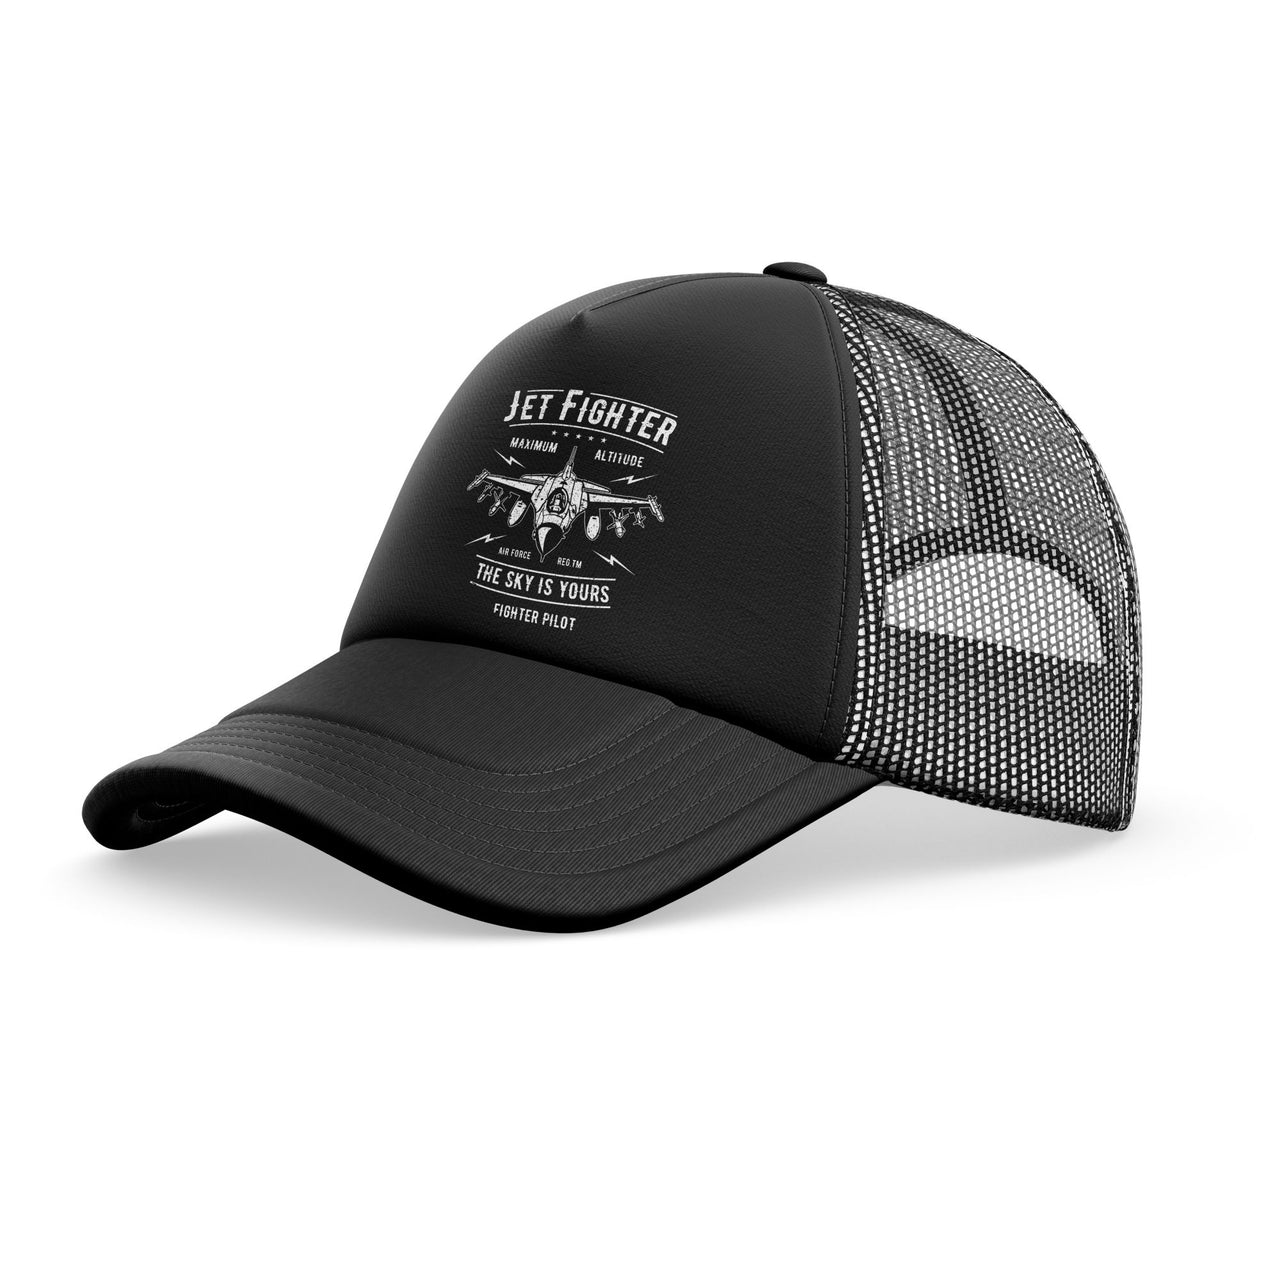 Jet Fighter - The Sky is Yours Designed Trucker Caps & Hats